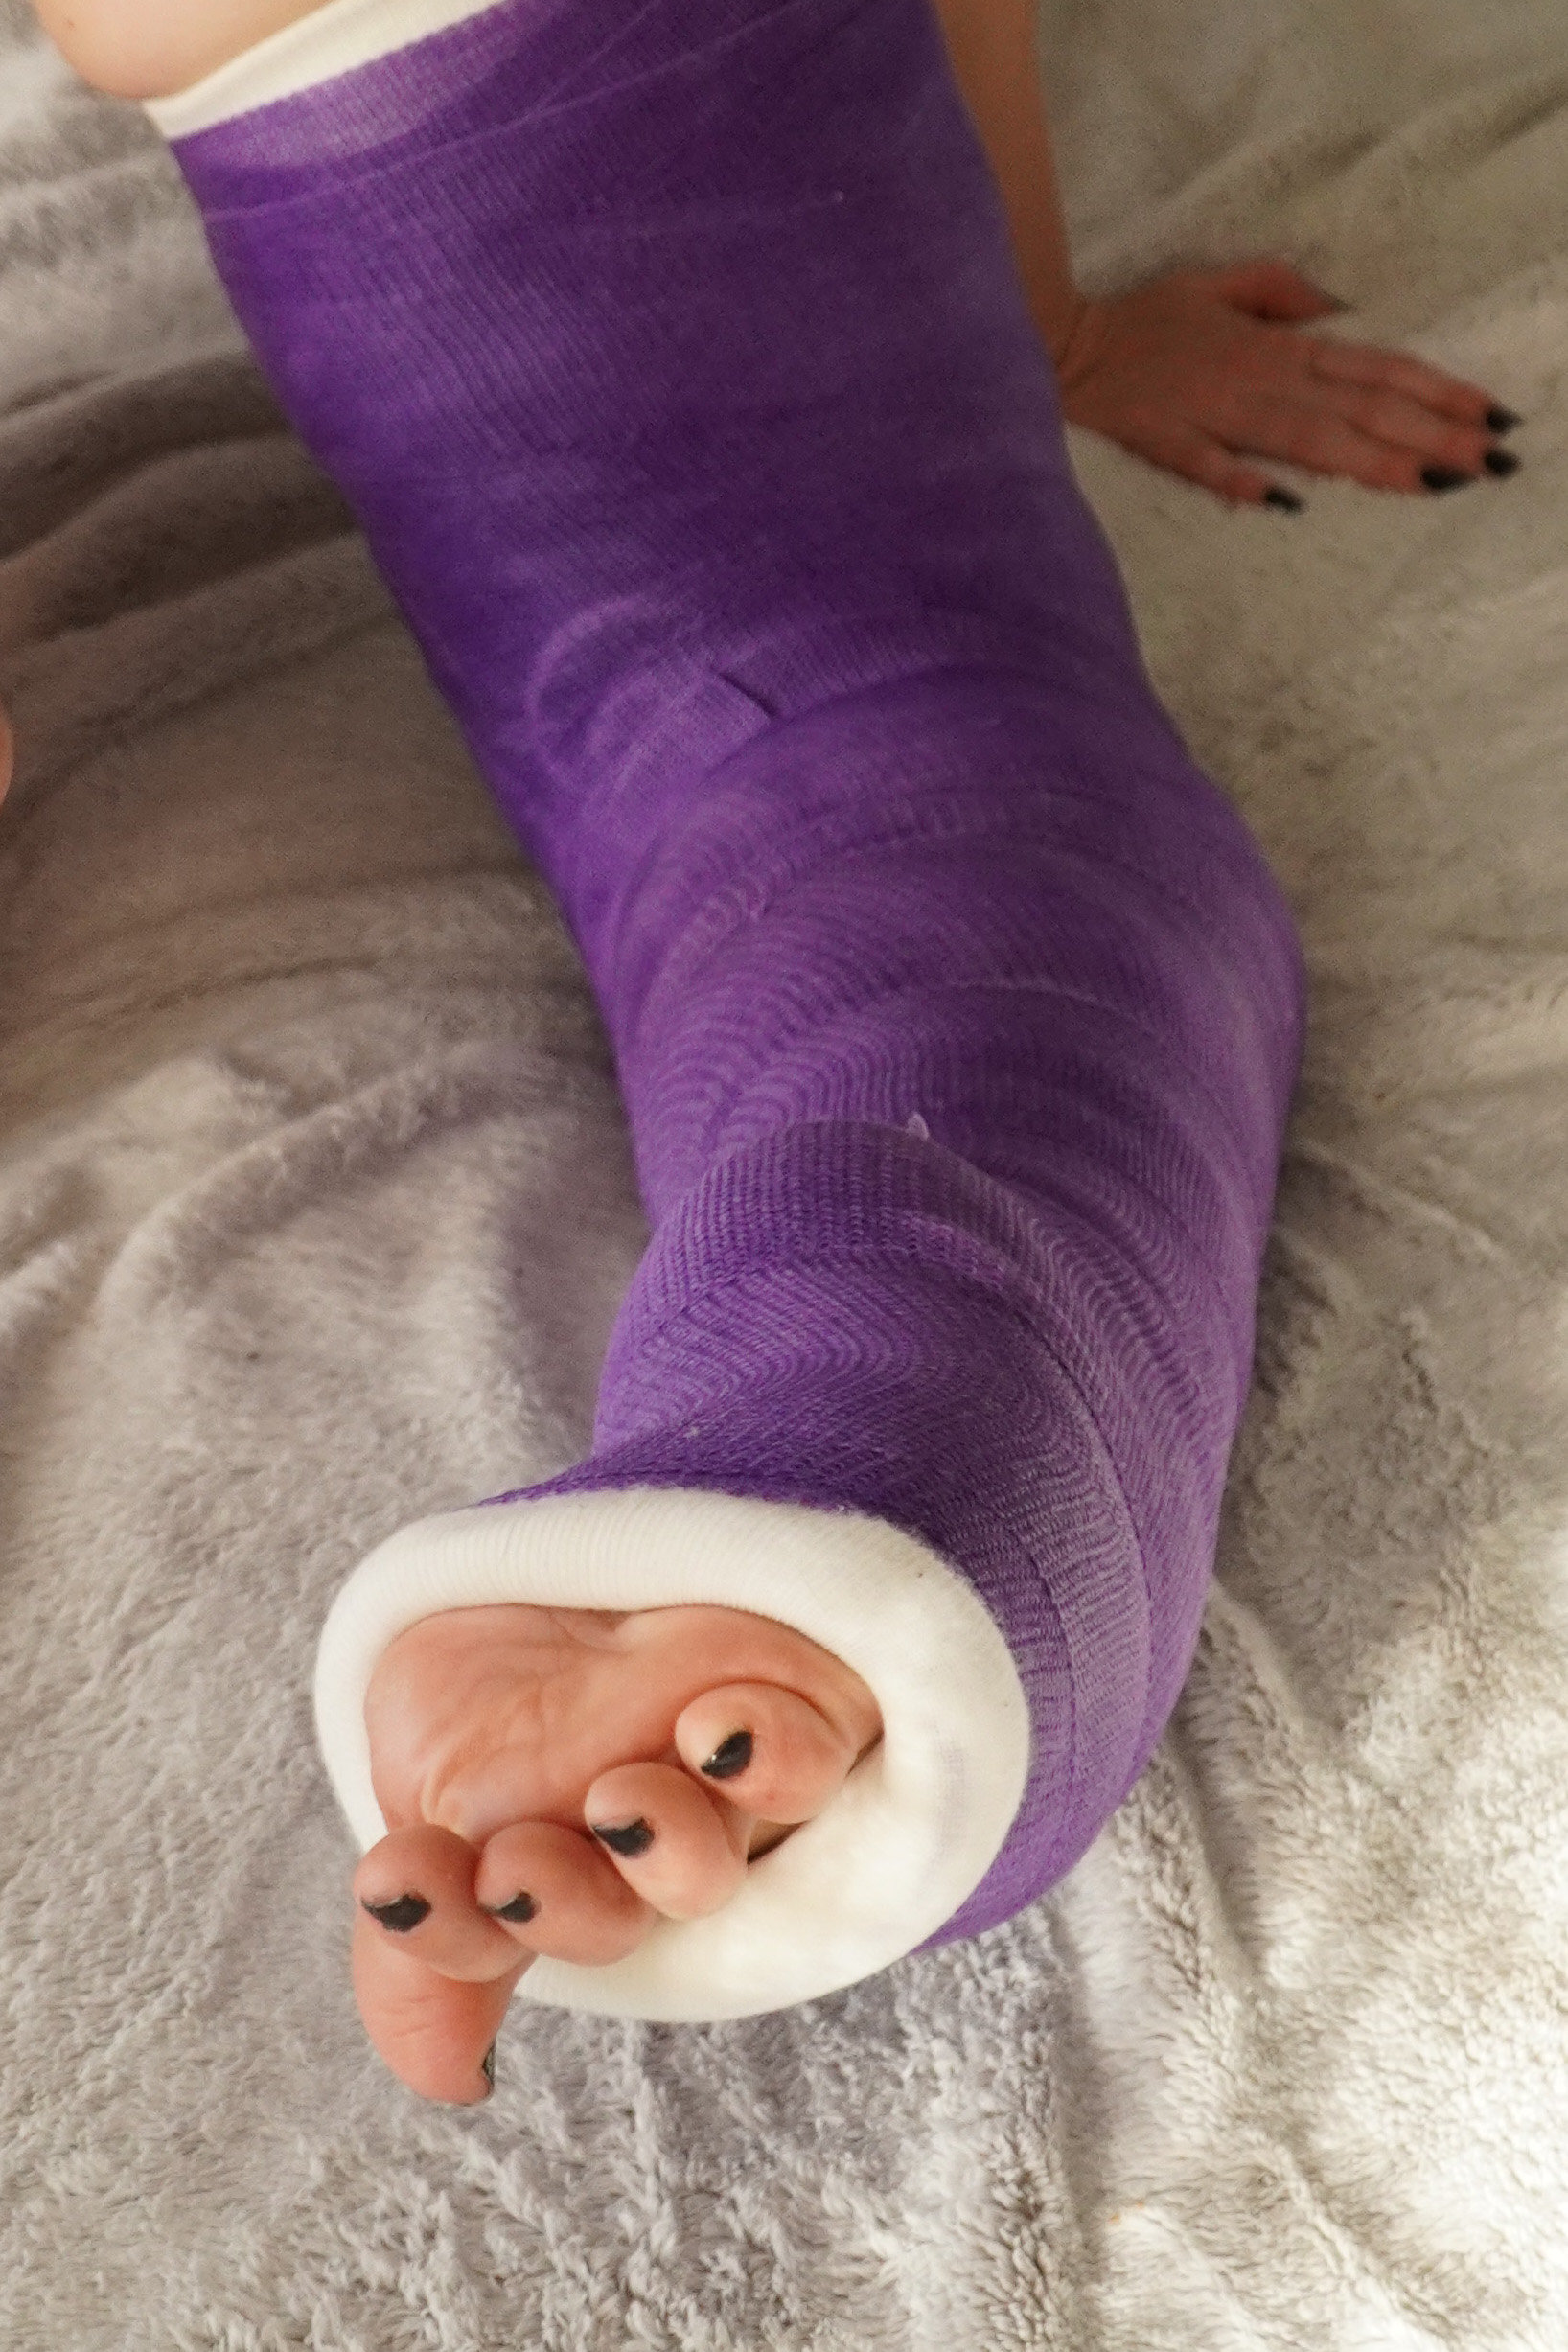 Ellen's Purple Pointed SHS - Ellen looks amazing in this purple SHS with her smooth porcelain skin and extremely pointed foot. 